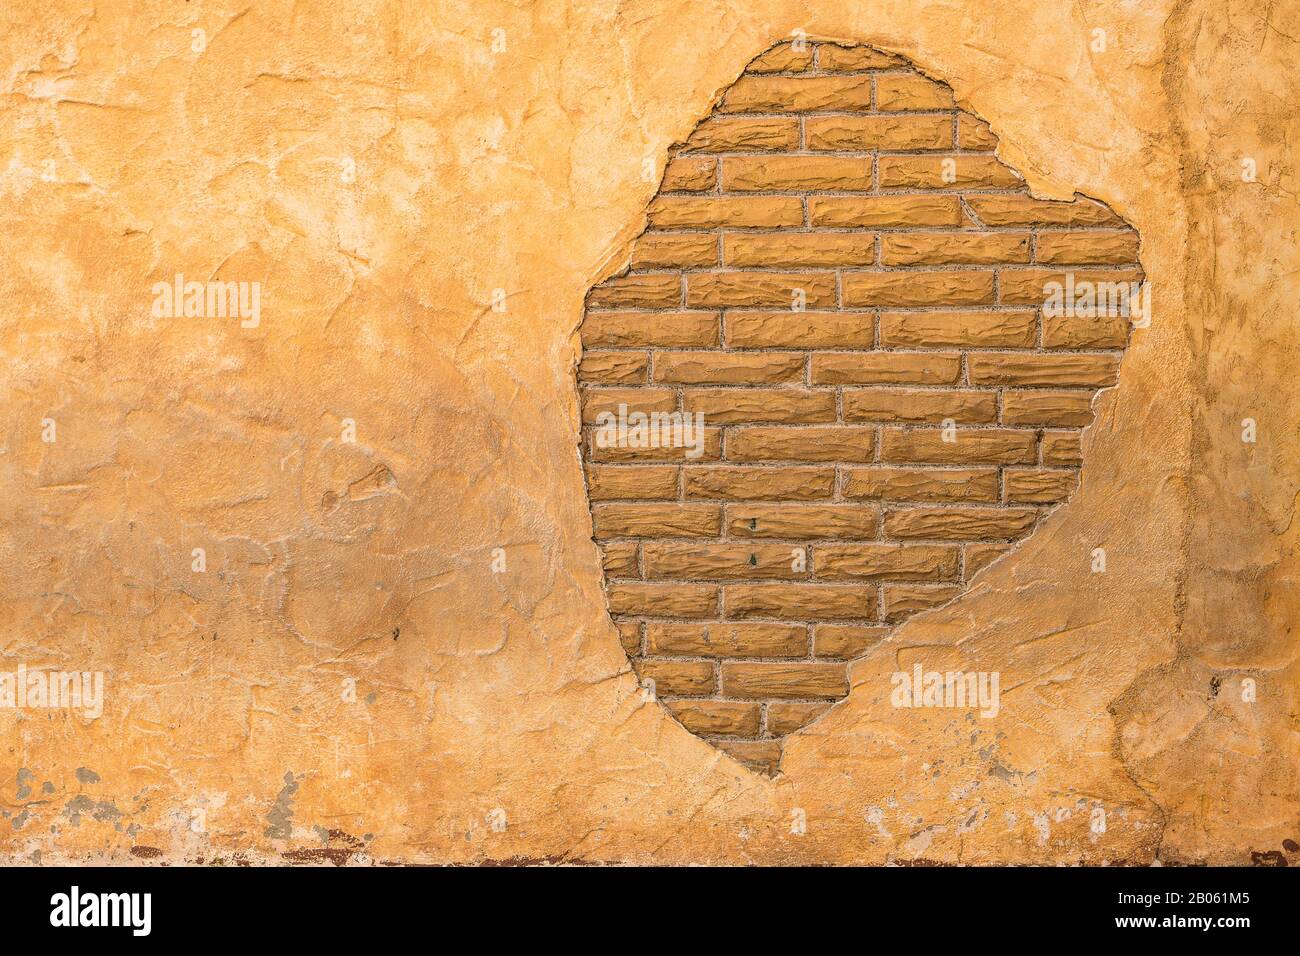 Brick behind Lathe Stucco Wall in Brown and Beige colors from Old Building Stock Photo